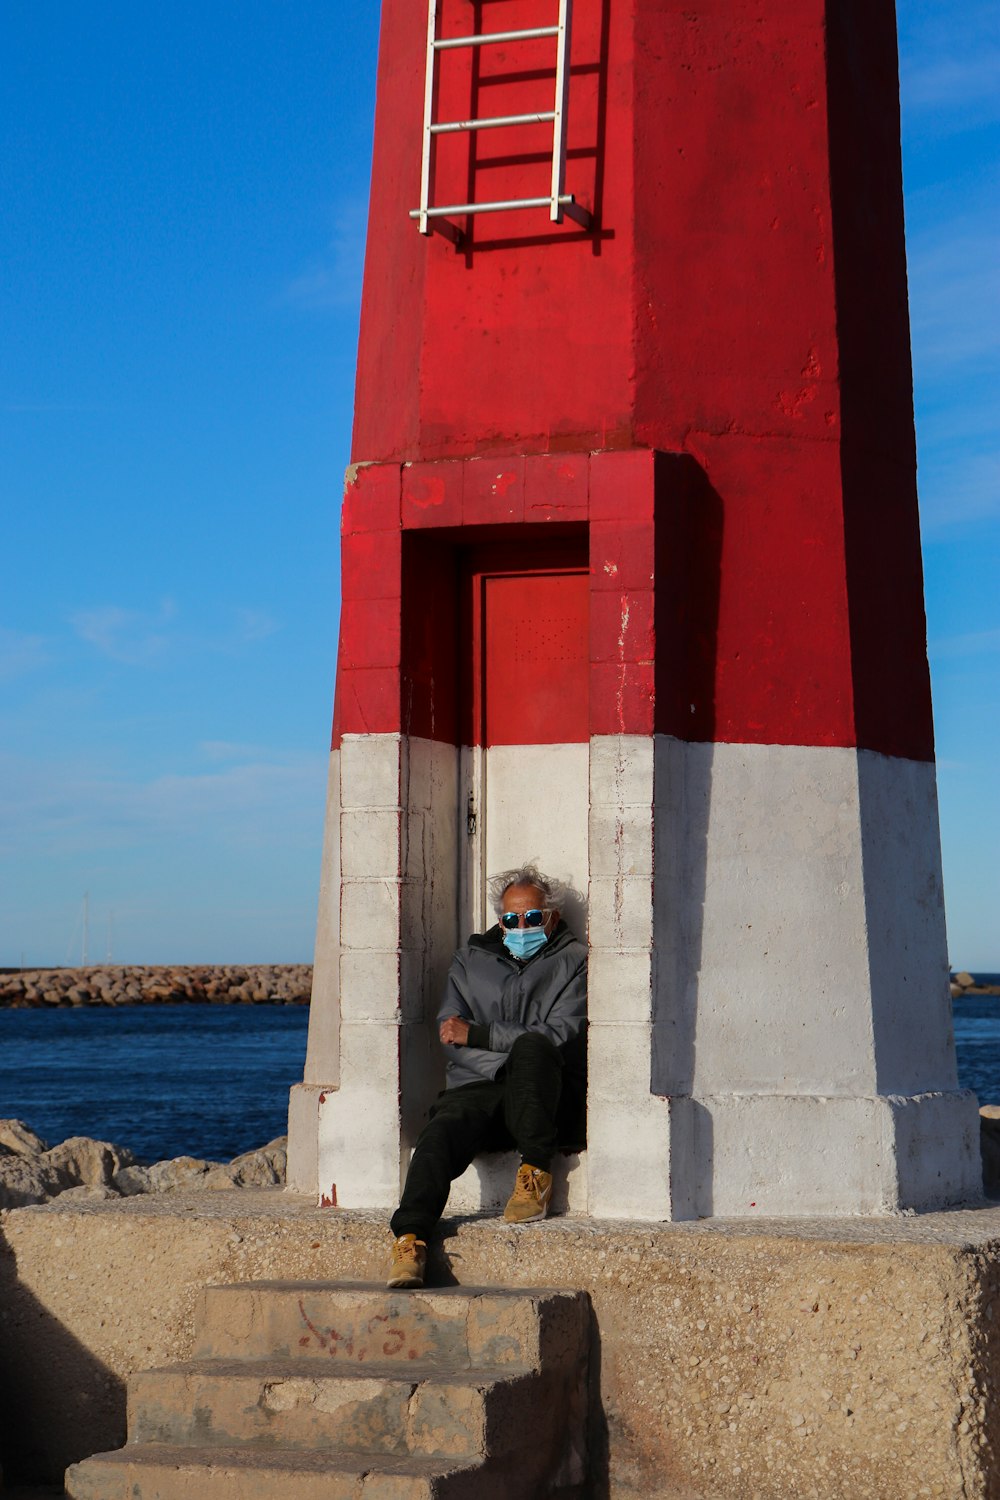 man in black jacket sitting on concrete post near body of water during daytime